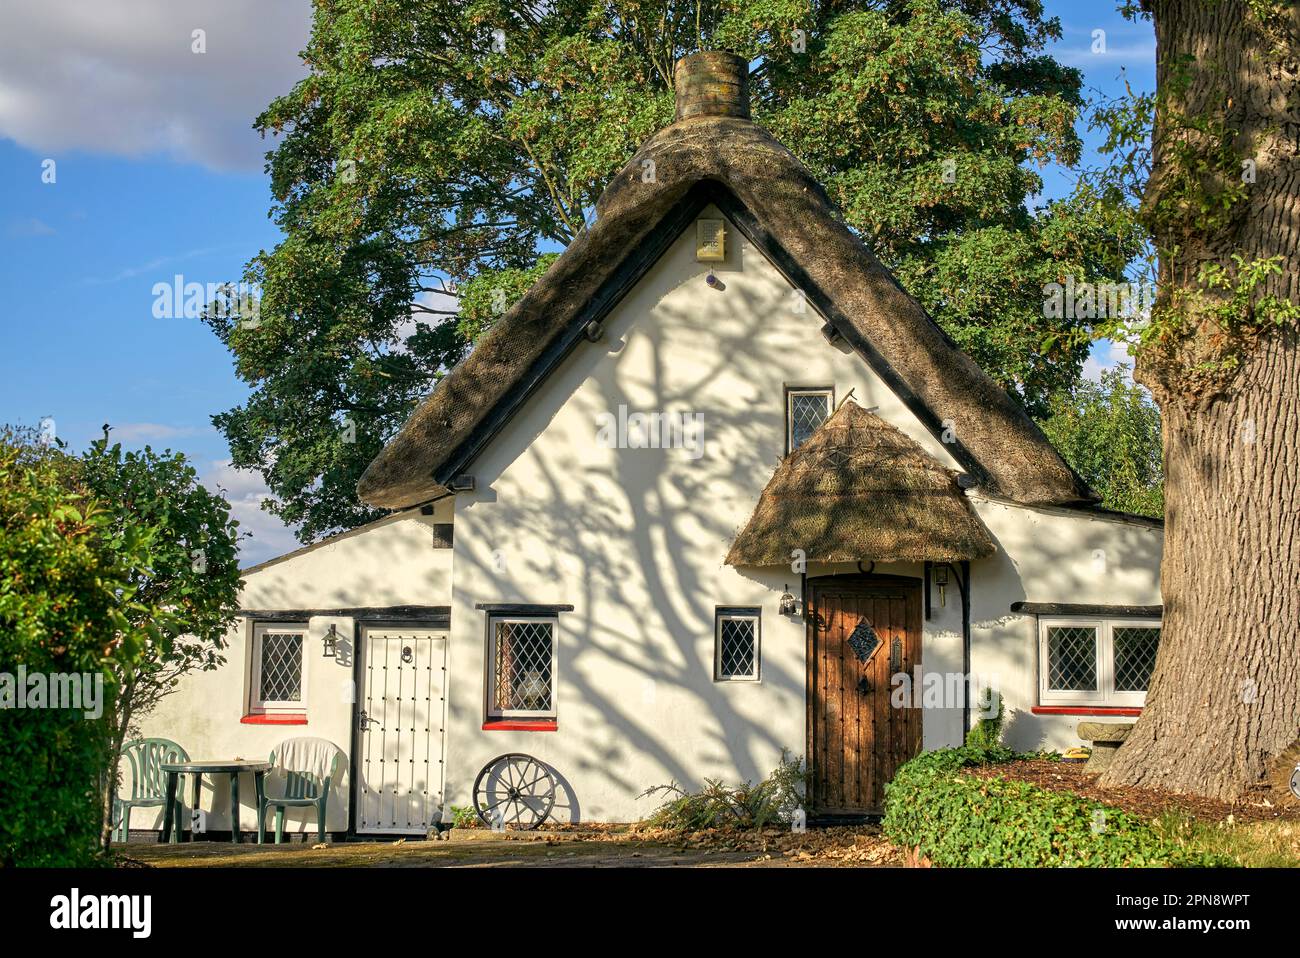 Thatched Cottage UK. Picturesque traditional thatched cottage exterior in an English rural setting. England UK Stock Photo